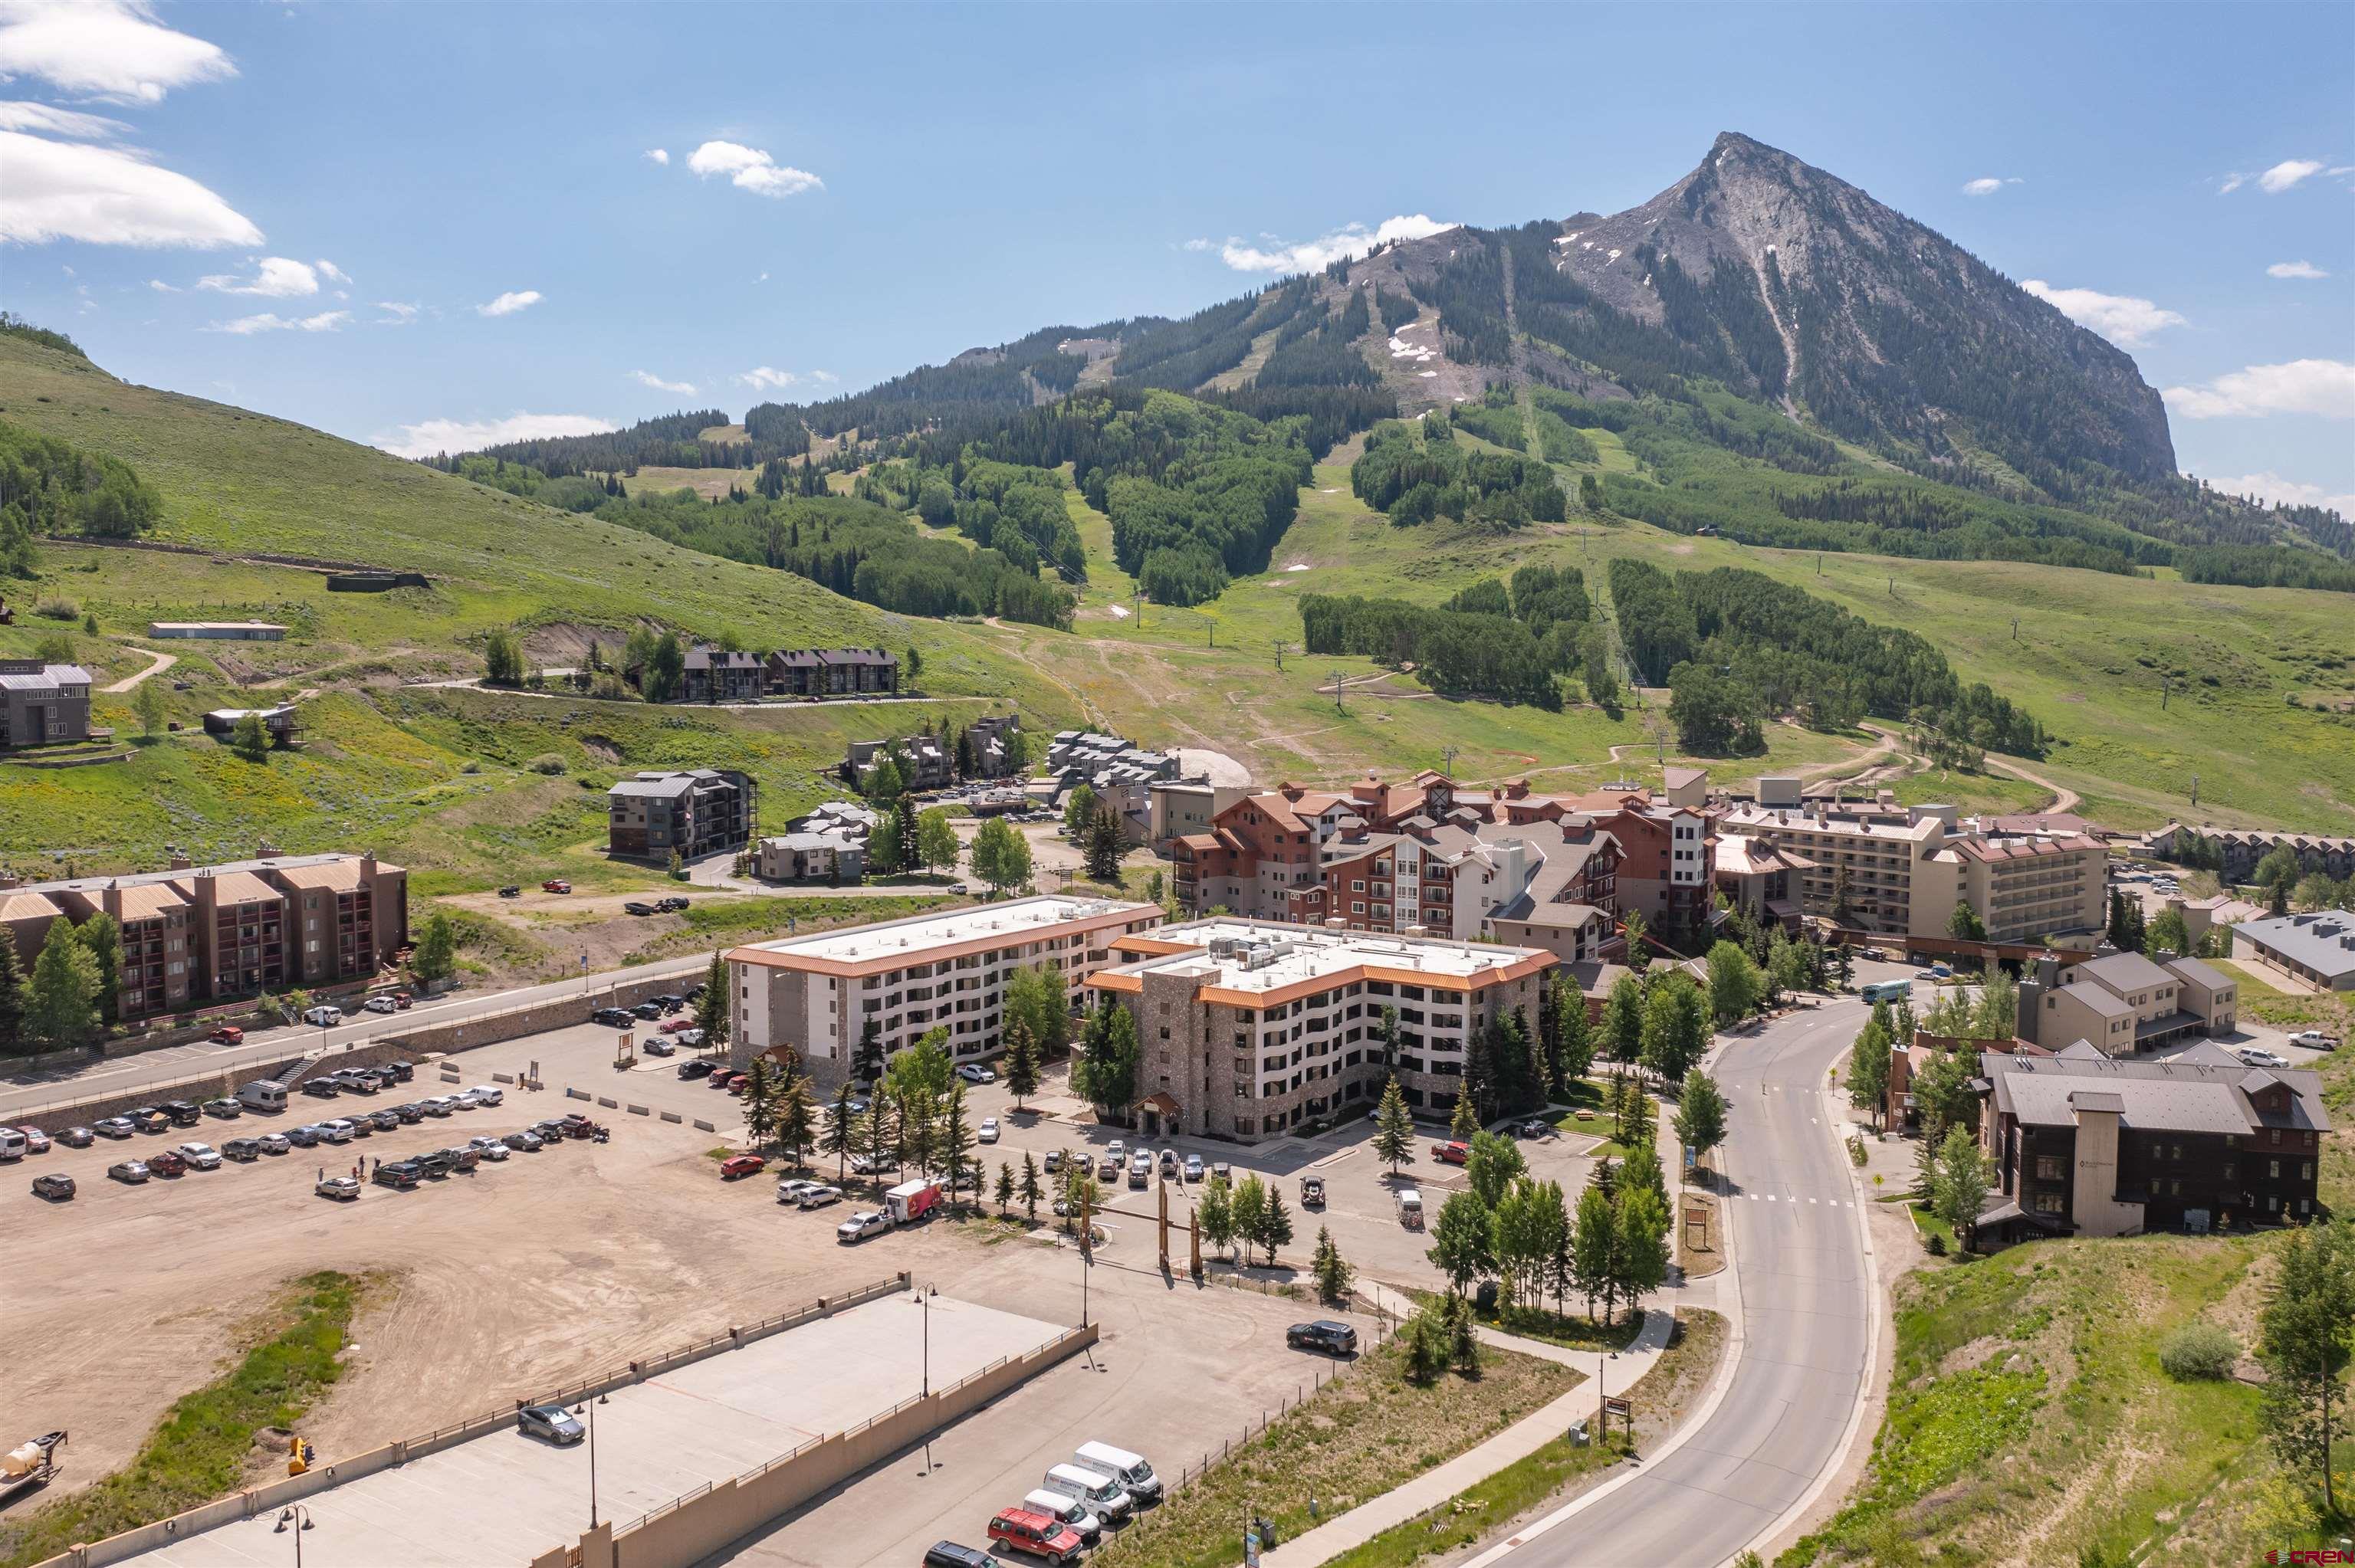 6 Emmons Road, Mt. Crested Butte, CO 81225